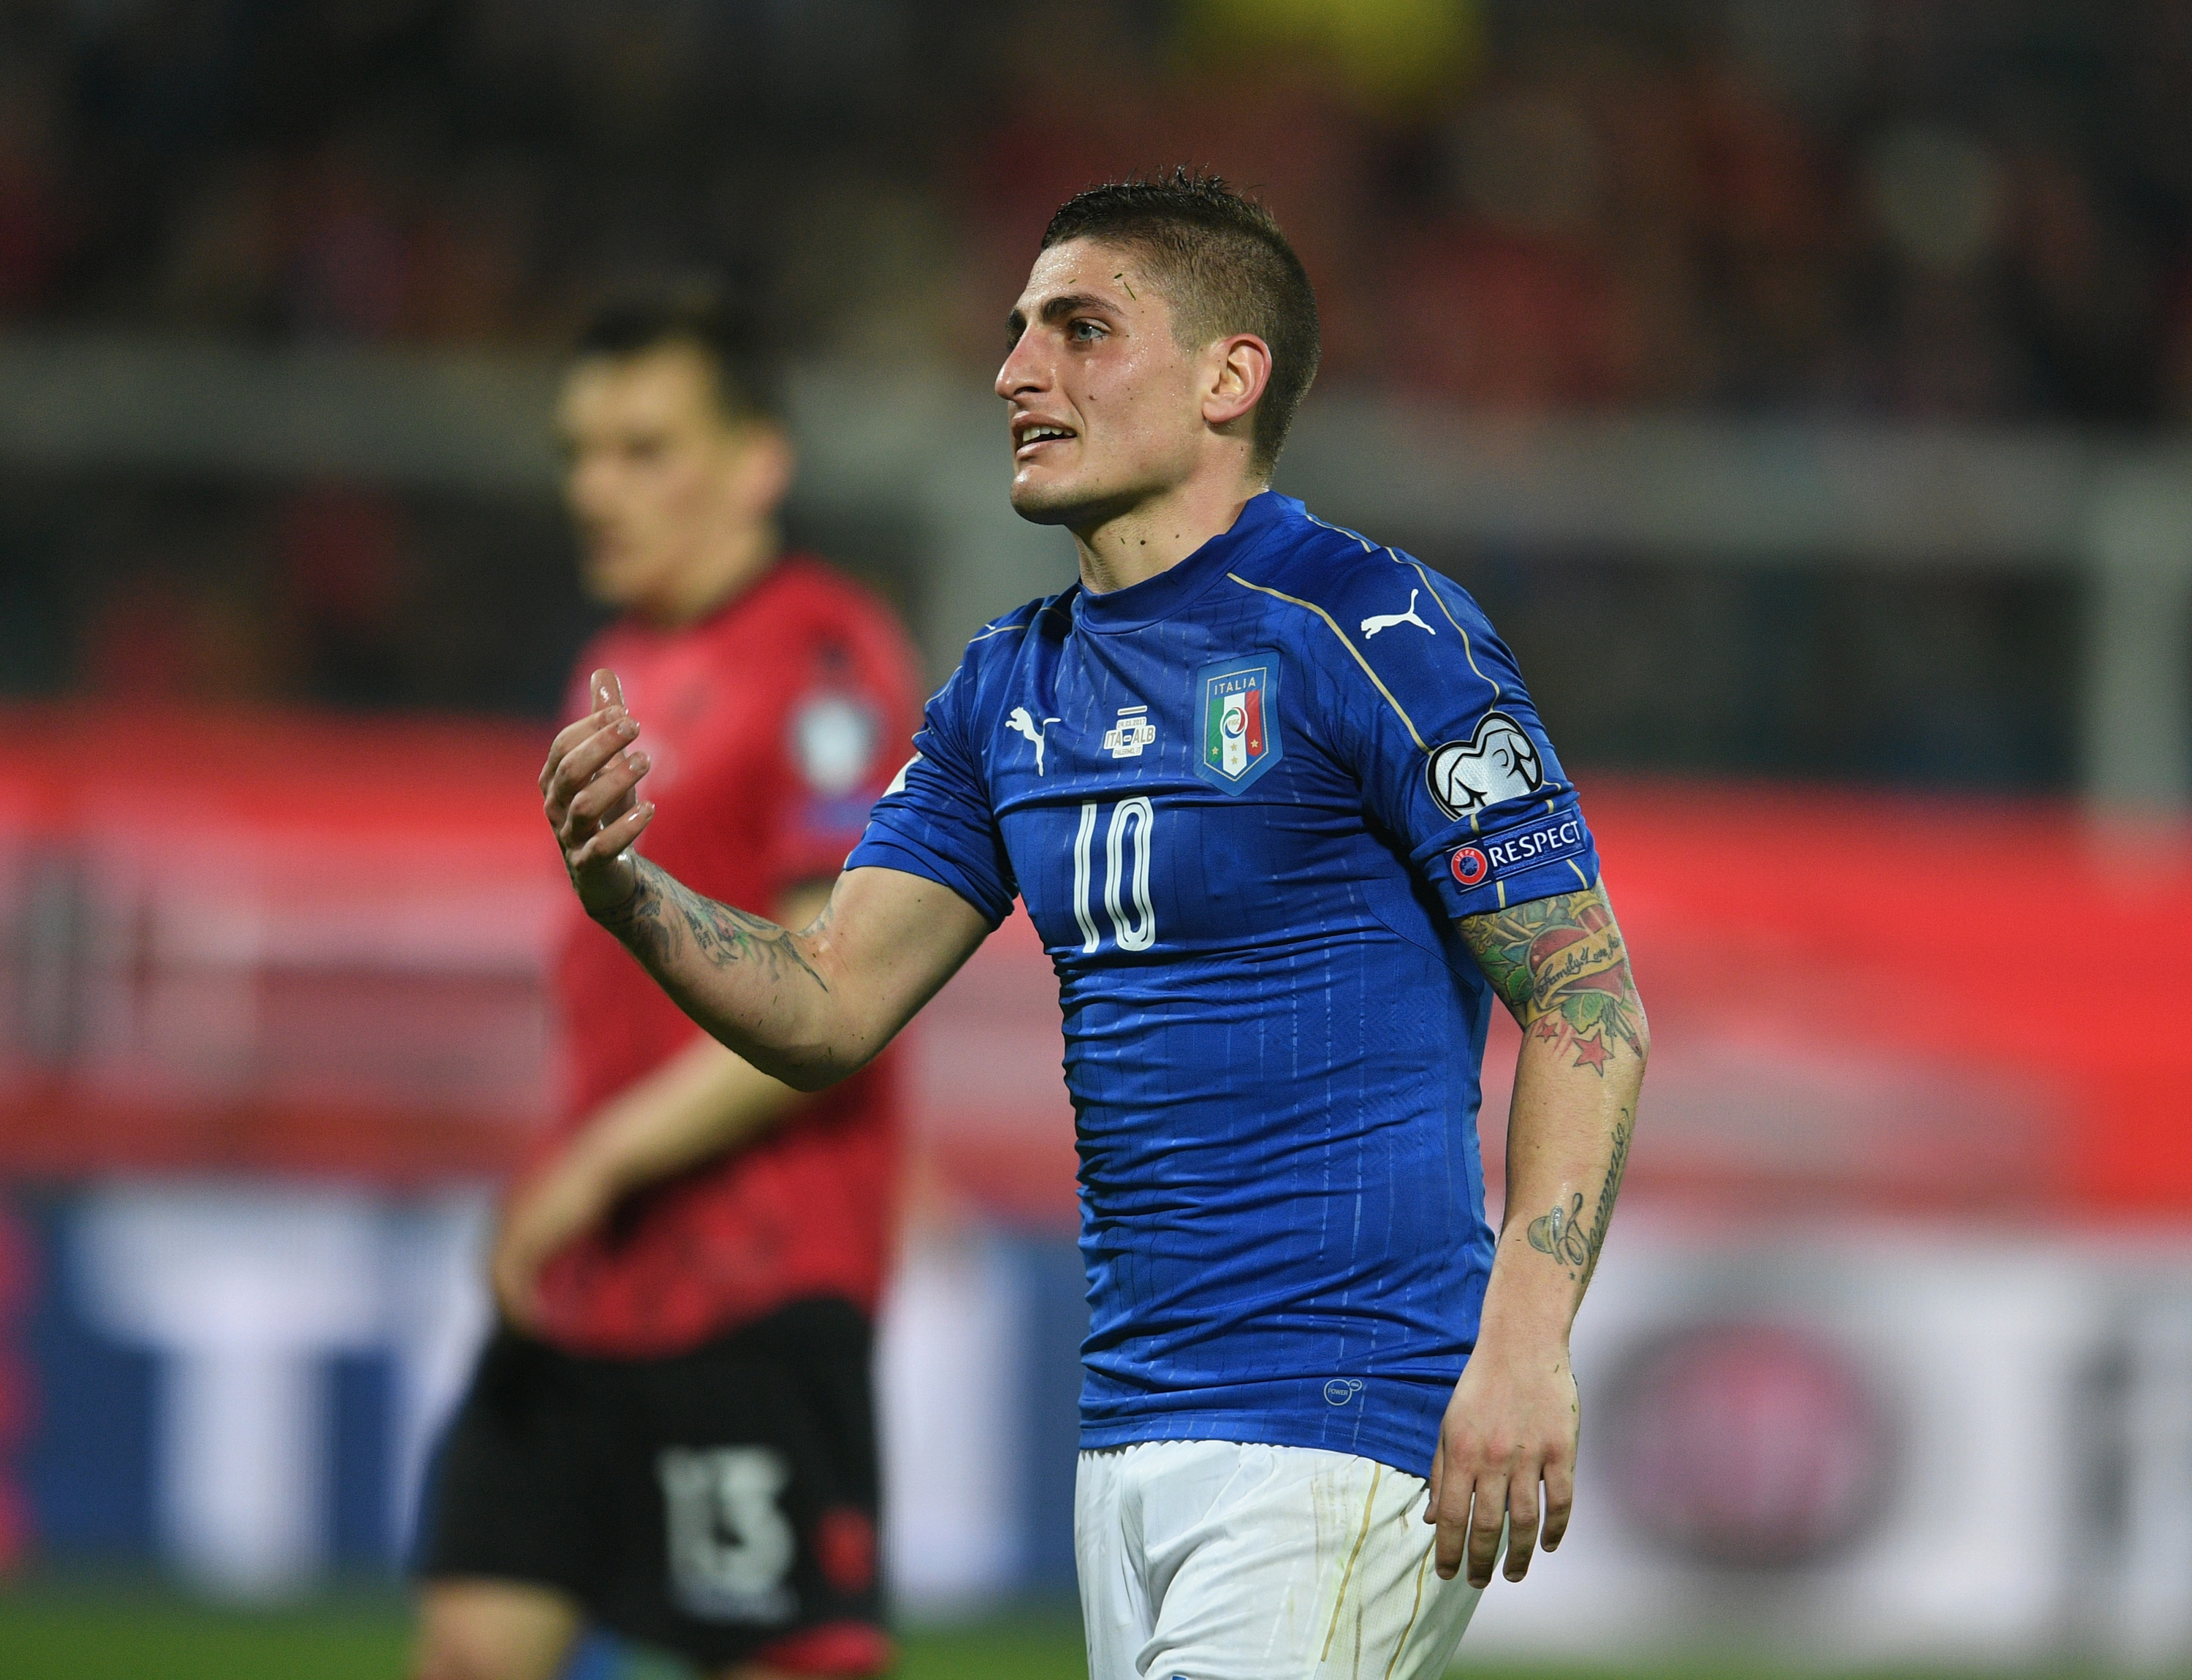 PALERMO, ITALY - MARCH 24:  Marco Verratti of Italy looks on during the FIFA 2018 World Cup Qualifier between Italy and Albania at Stadio Renzo Barbera on March 24, 2017 in Palermo, .  (Photo by Claudio Villa/Getty Images)